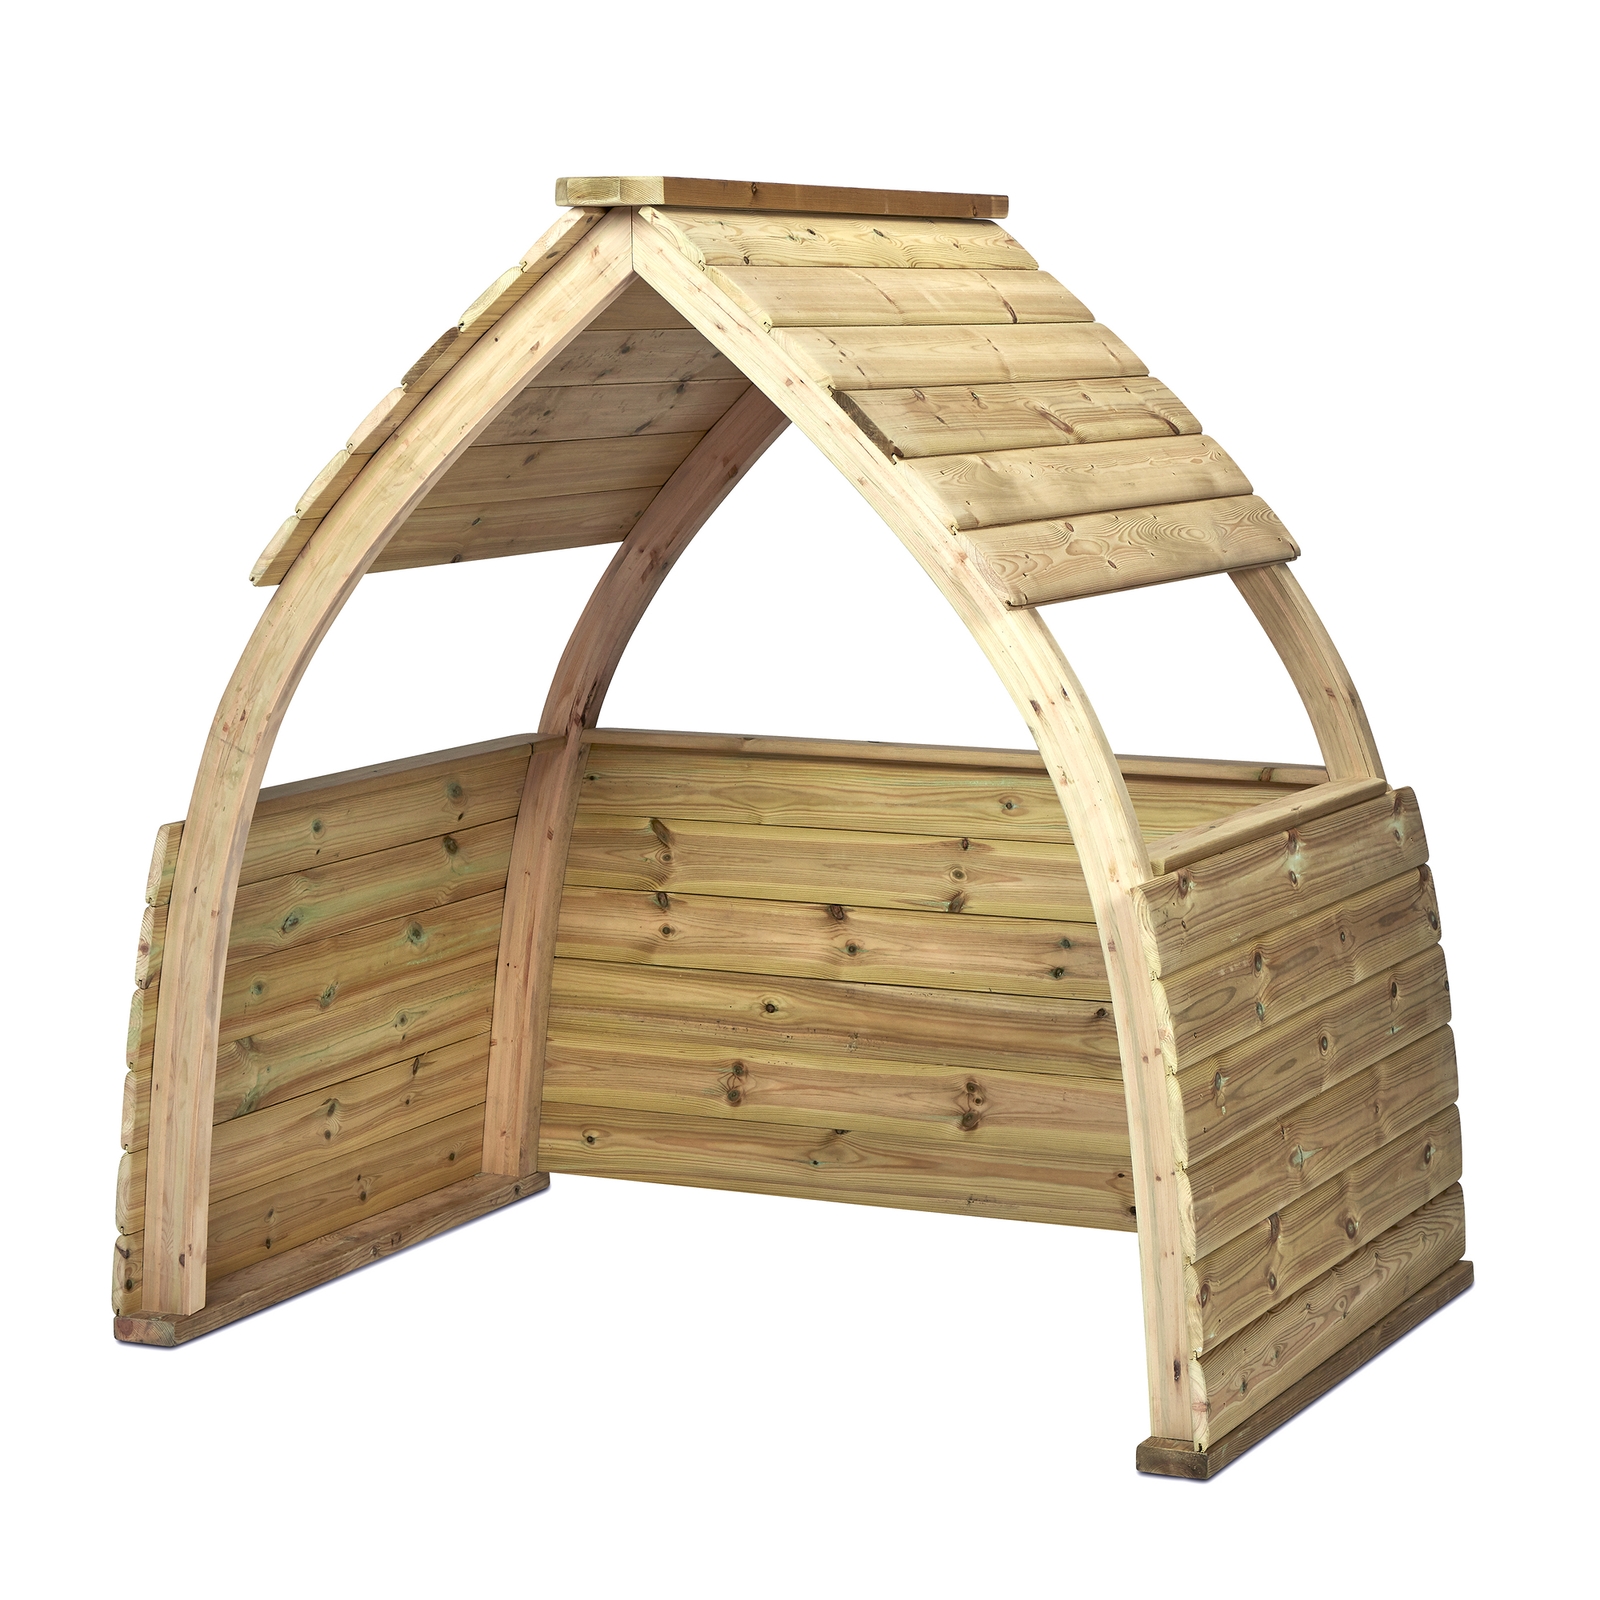 Millhouse Outdoor Wooden Play Shelter - L1400 x W1100 x H1400mm - Each